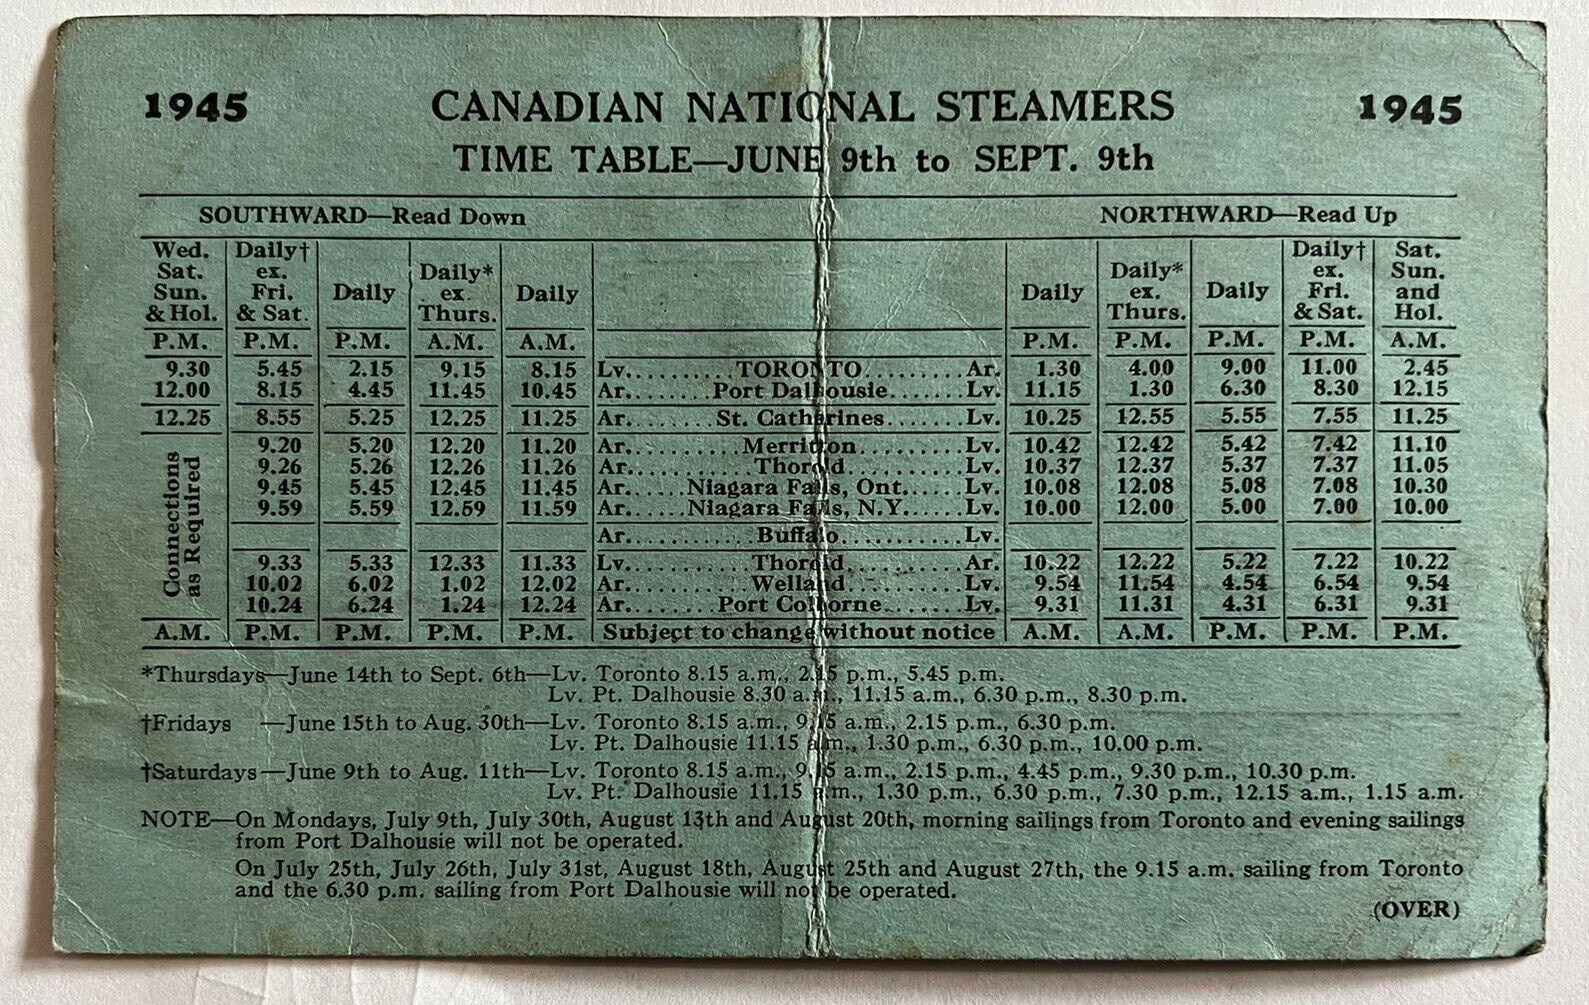 1945 CANADIAN NATIONAL STEAMERS TIME TABLE CARD